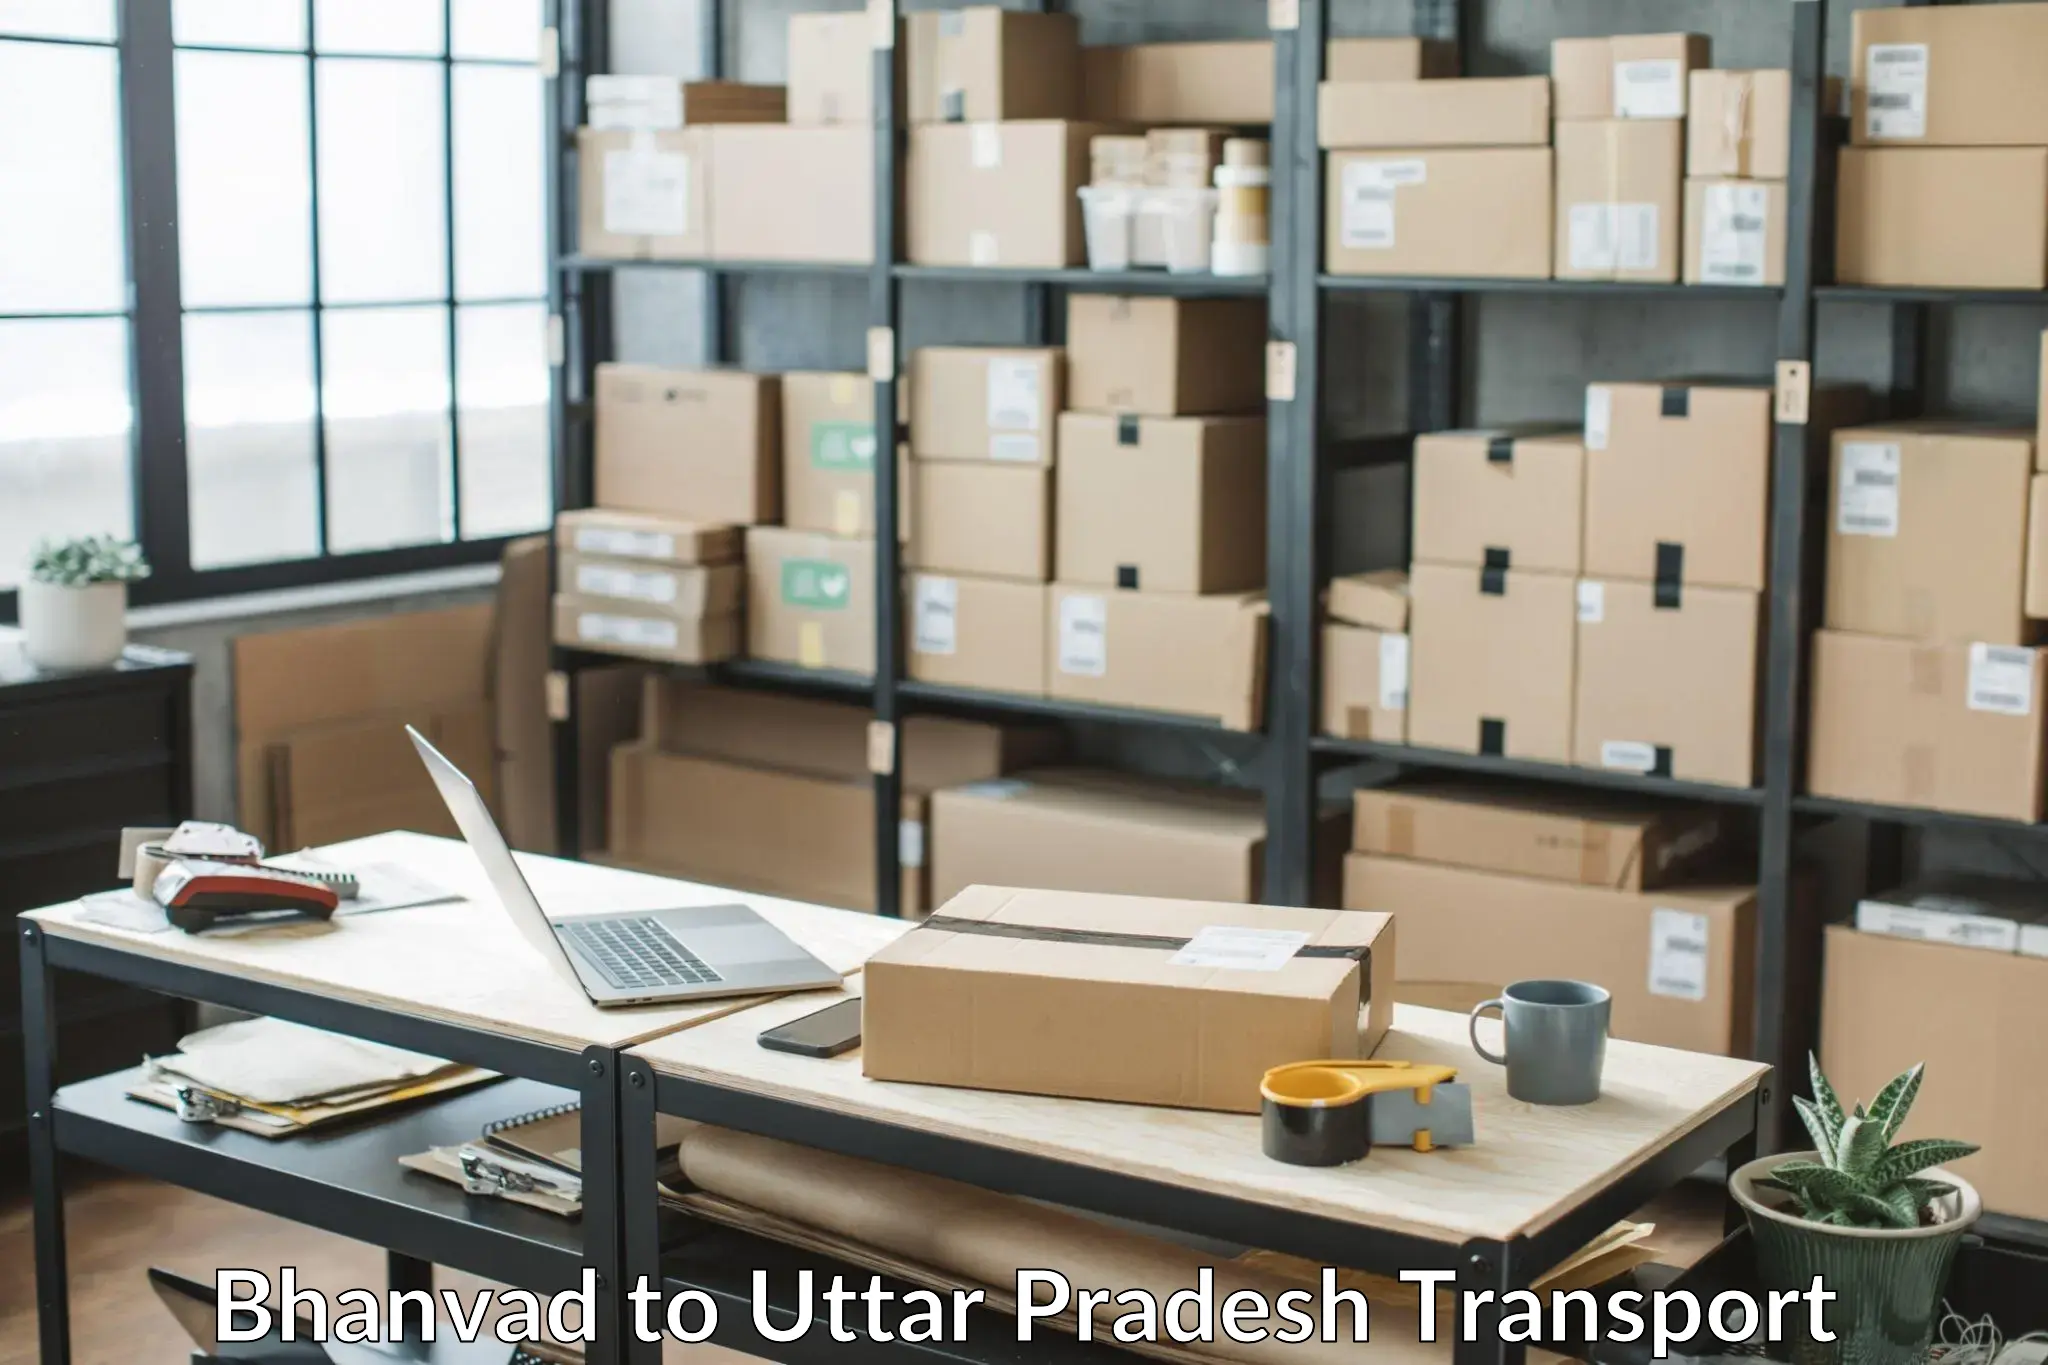 Road transport online services in Bhanvad to Fatehabad Agra